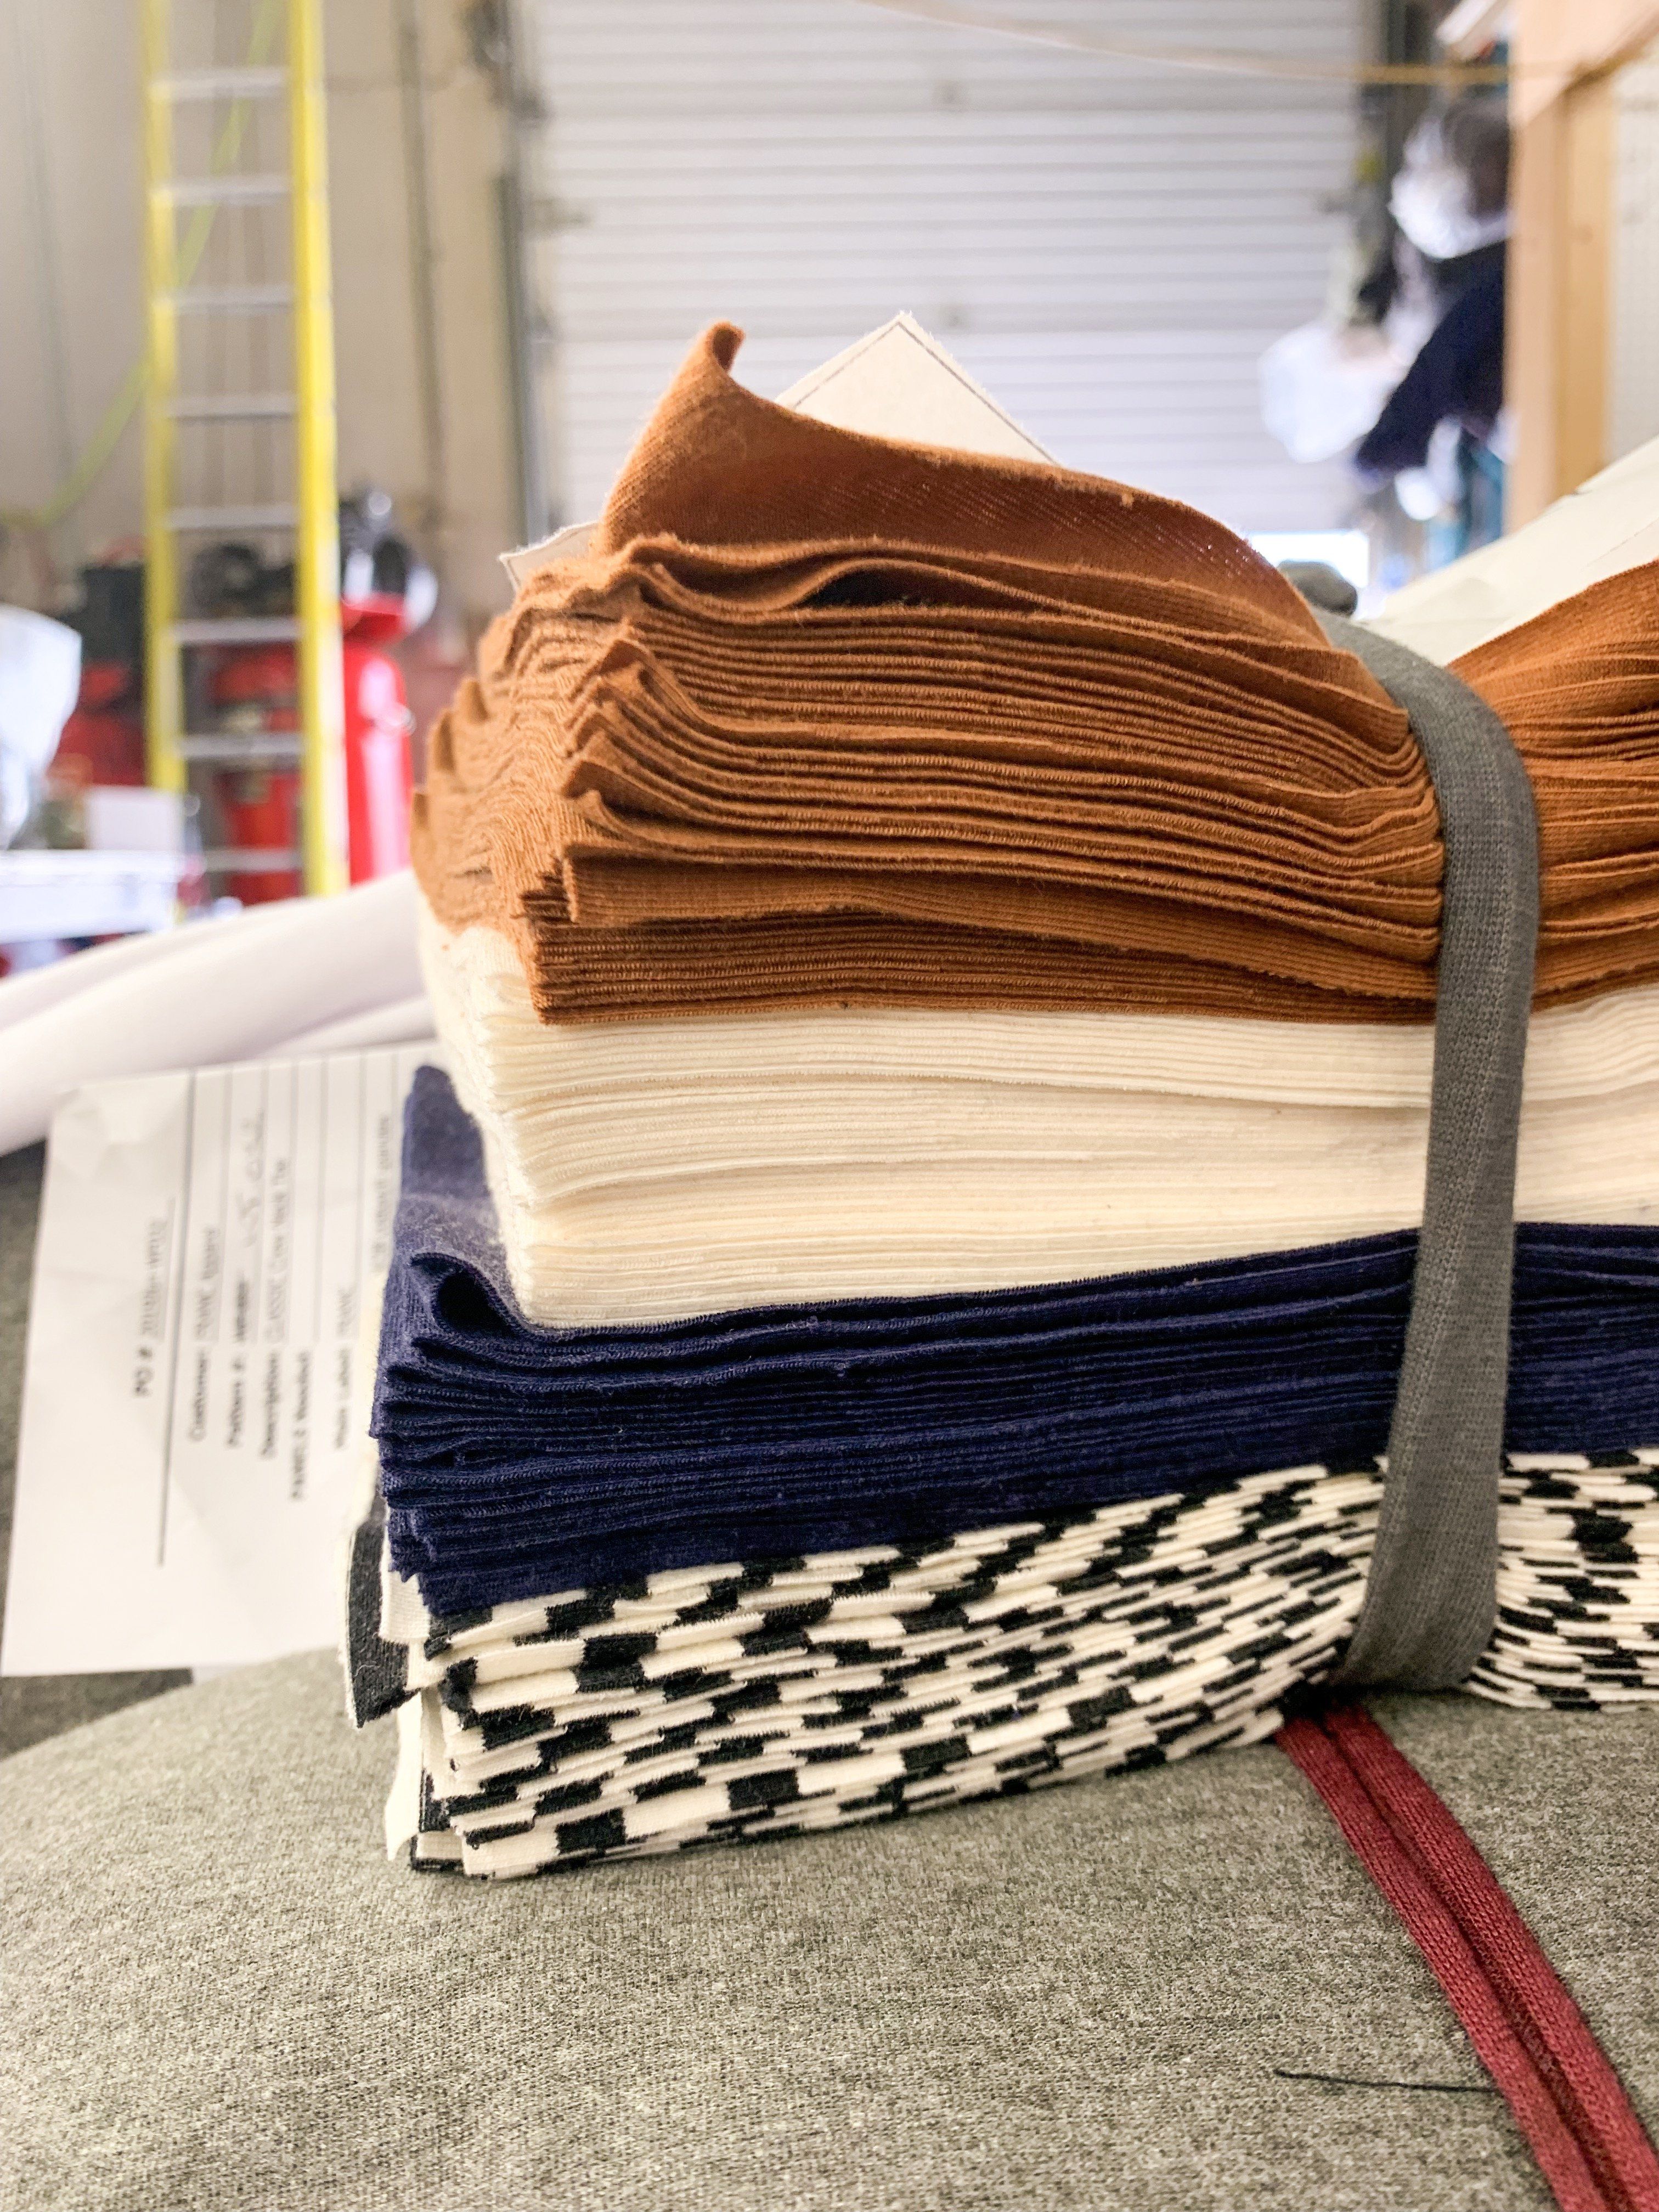 How We Handle Overstock, Samples, and Scrap Fabric - FRANC